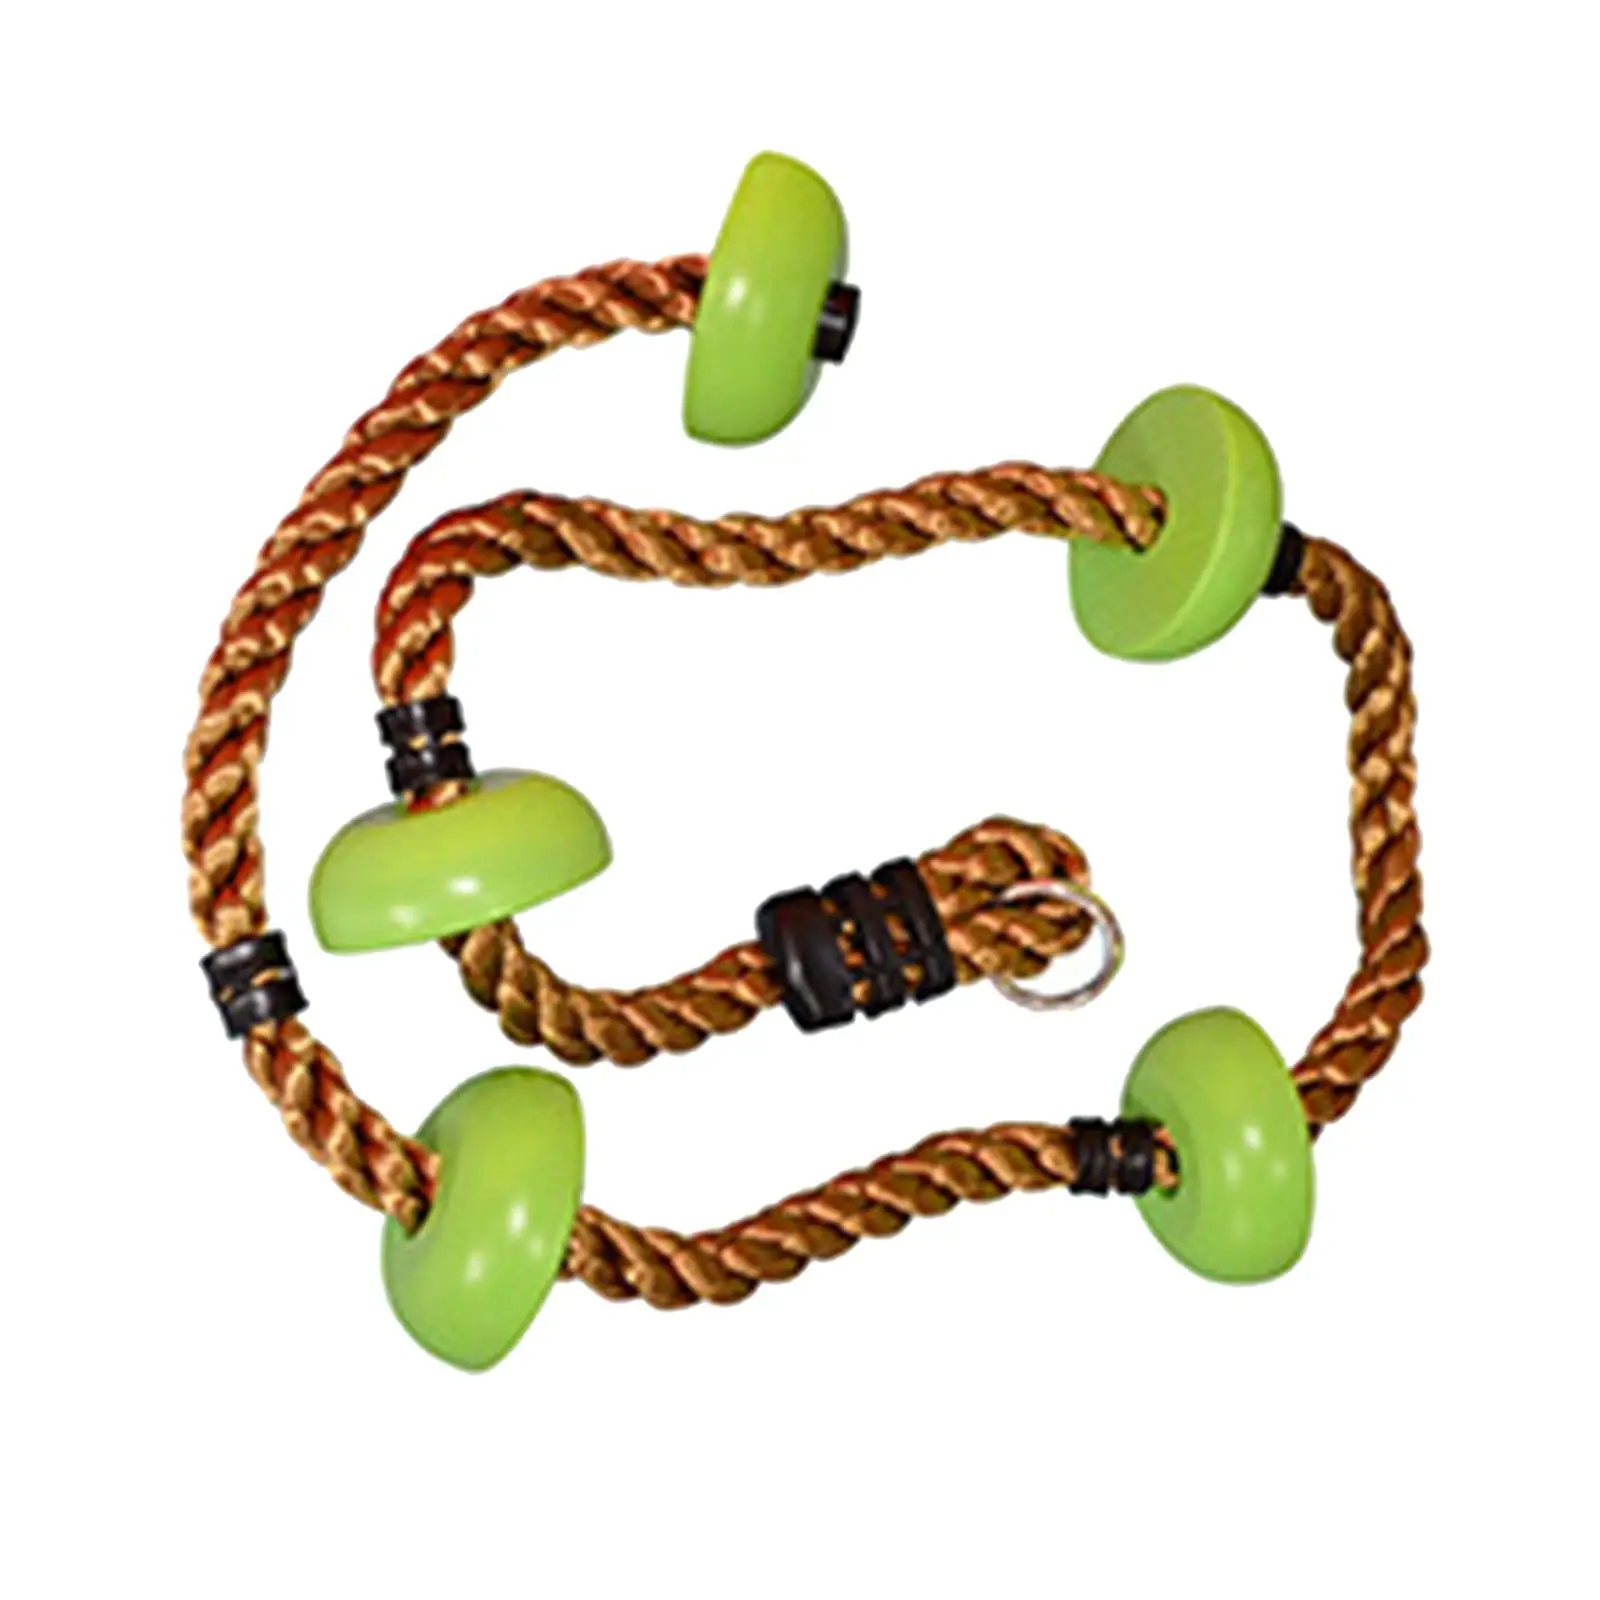 Climbing Rope Accessory with Disc Rope Ladder for Backyard Boys Girls Kids